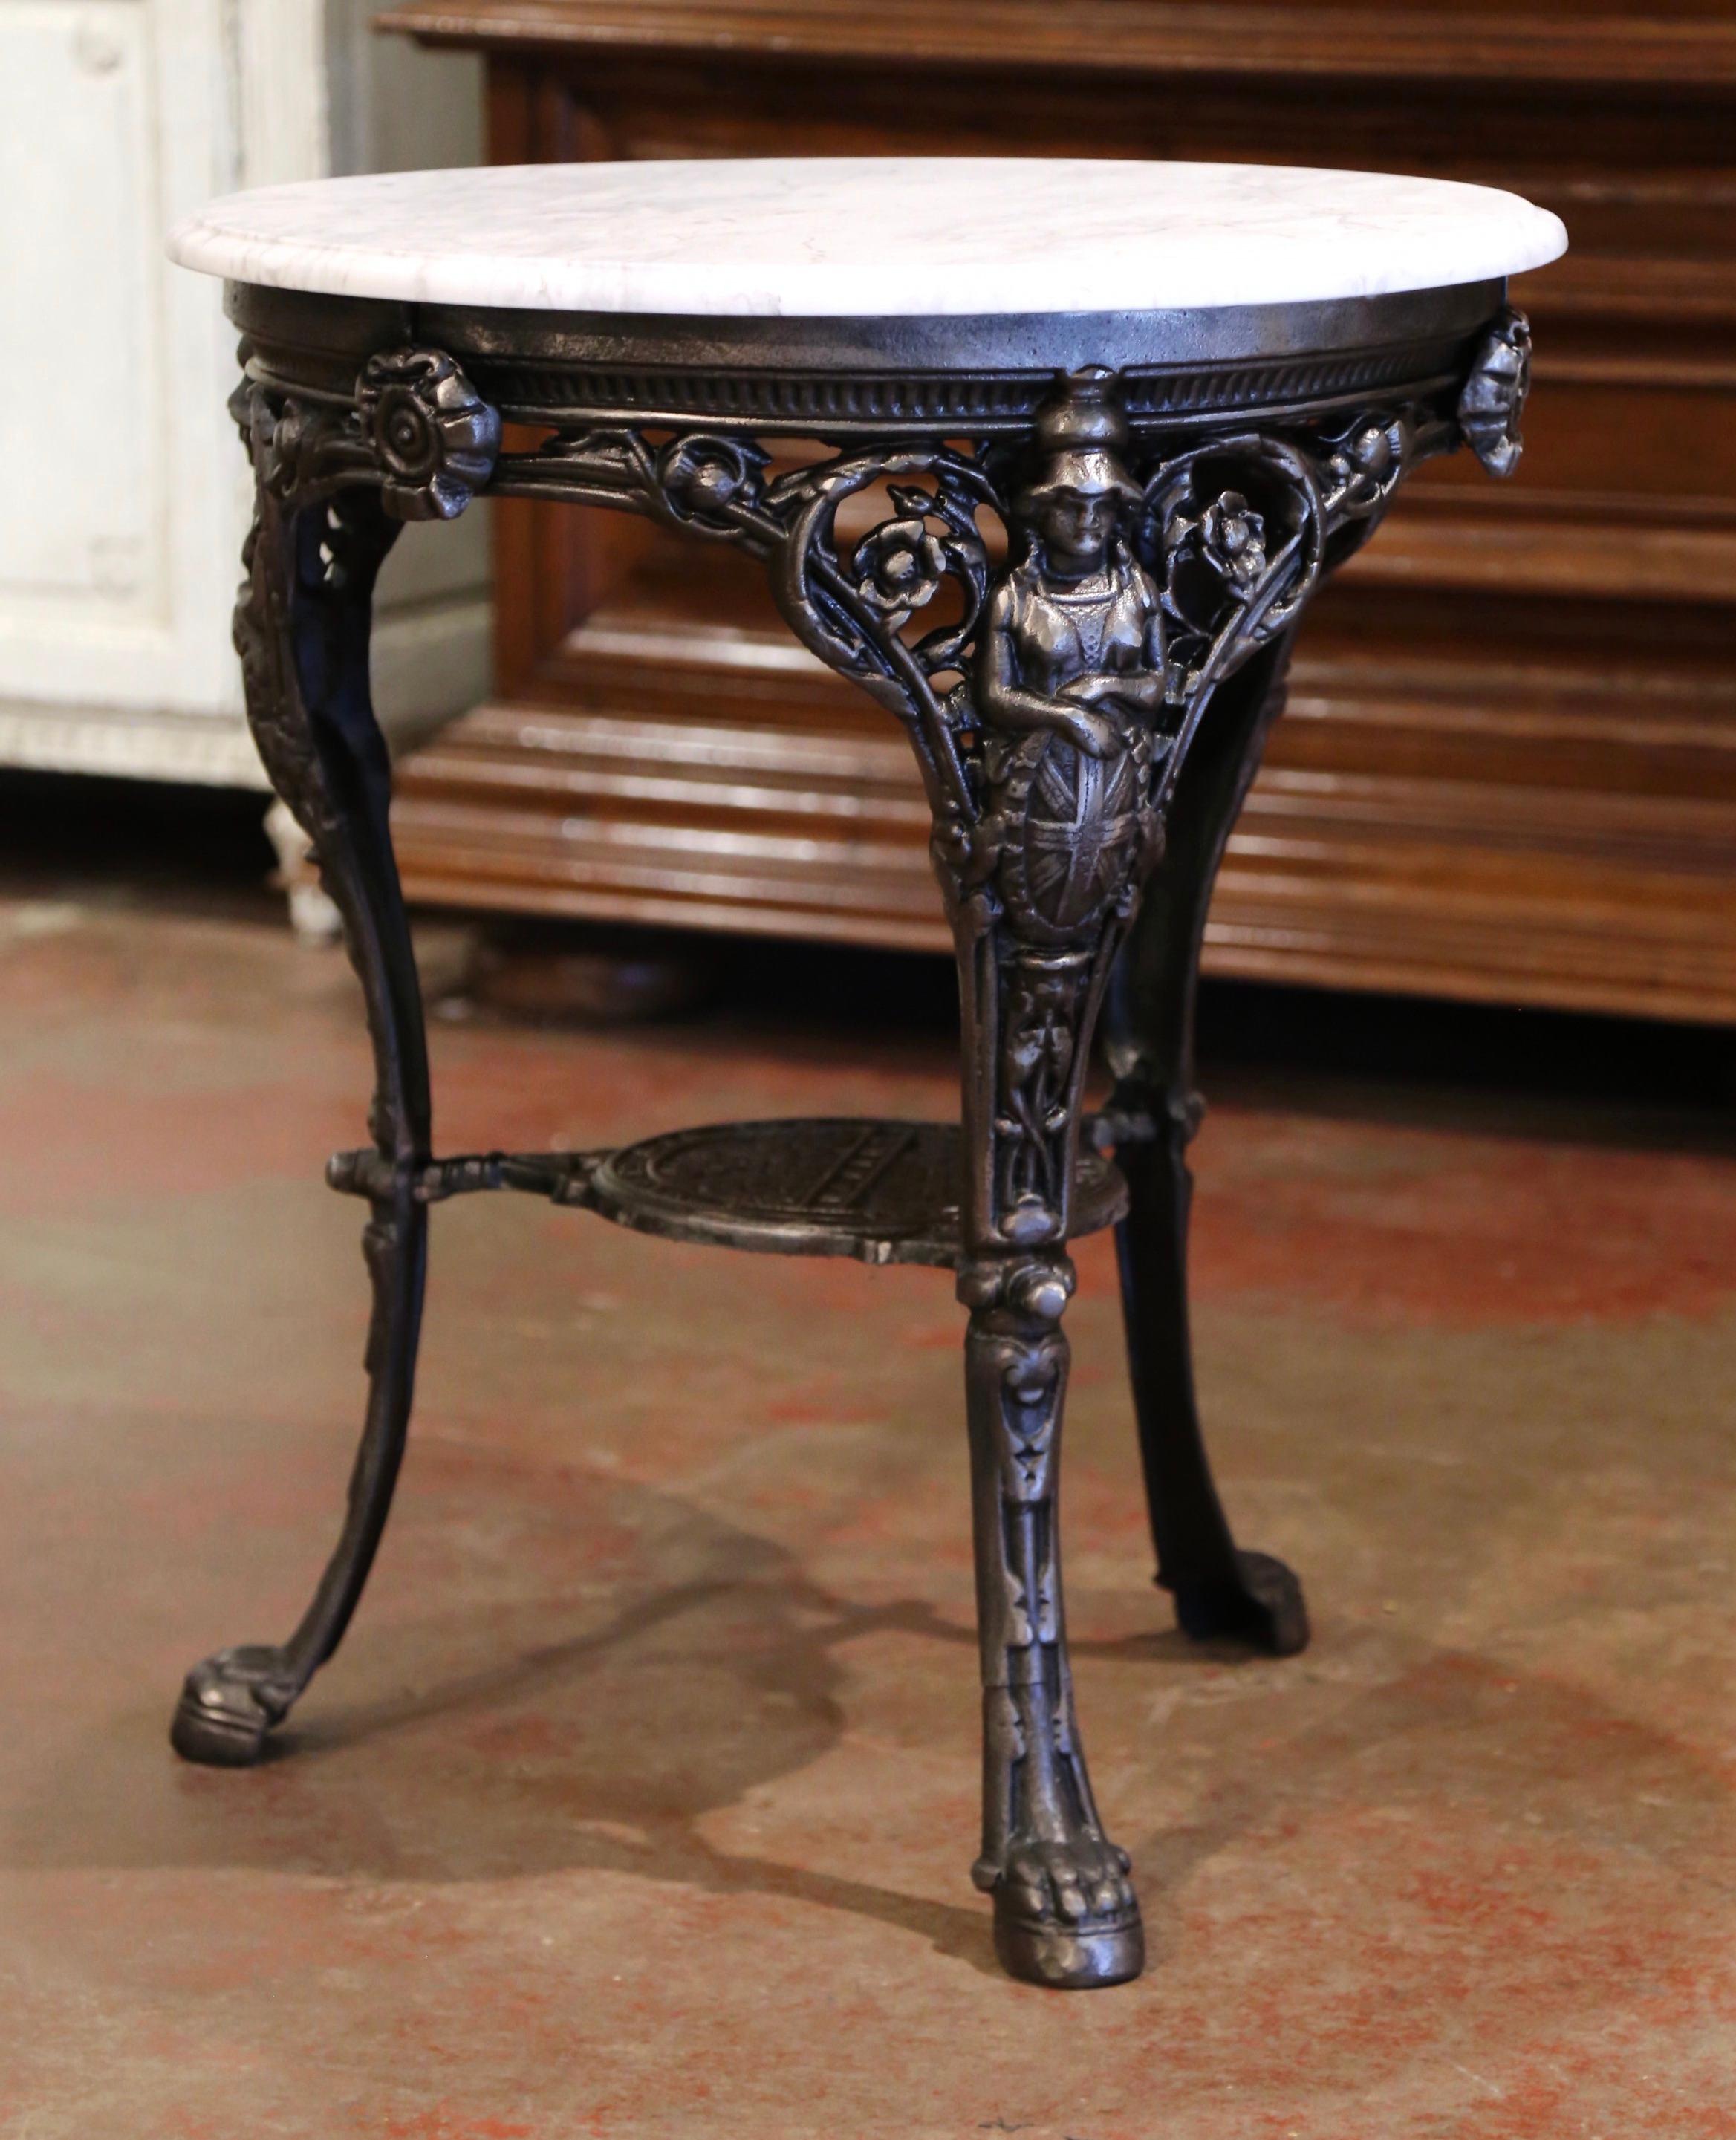 Hand-Crafted 19th Century English Outdoor Polished Iron Pub Gueridon Table with Marble Top